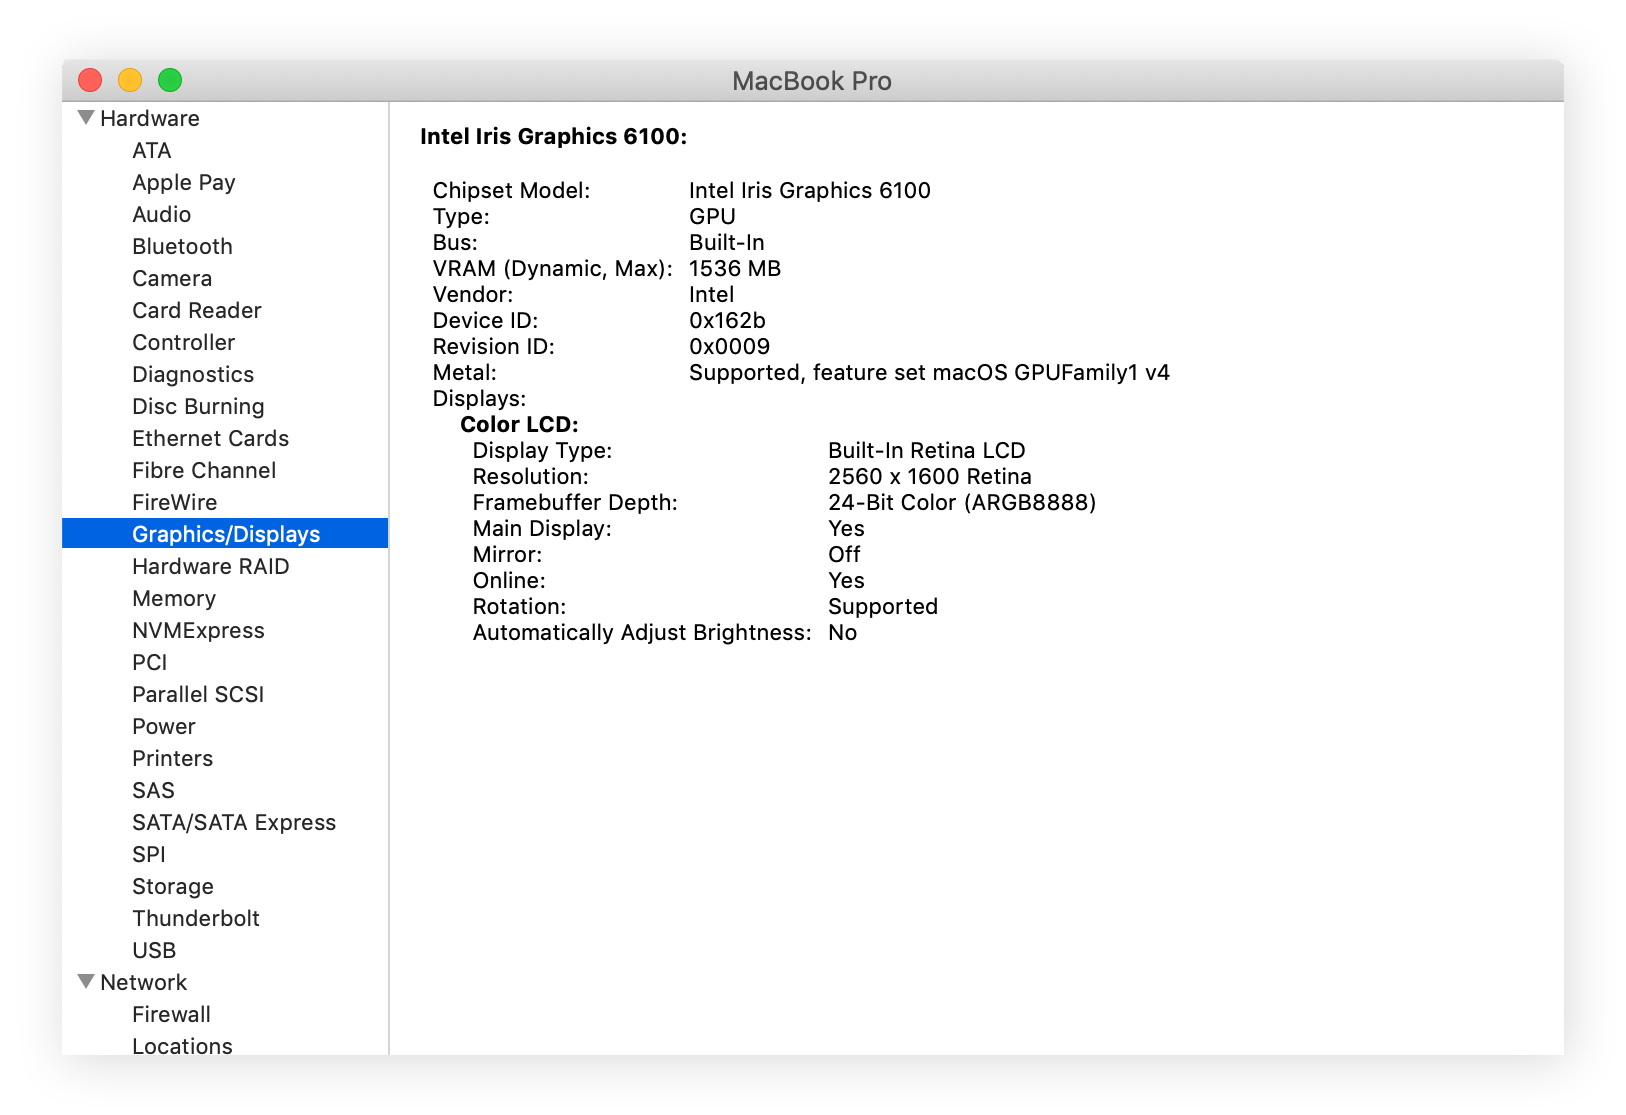 Learning more details about your graphics card using System Report in About this Mac.